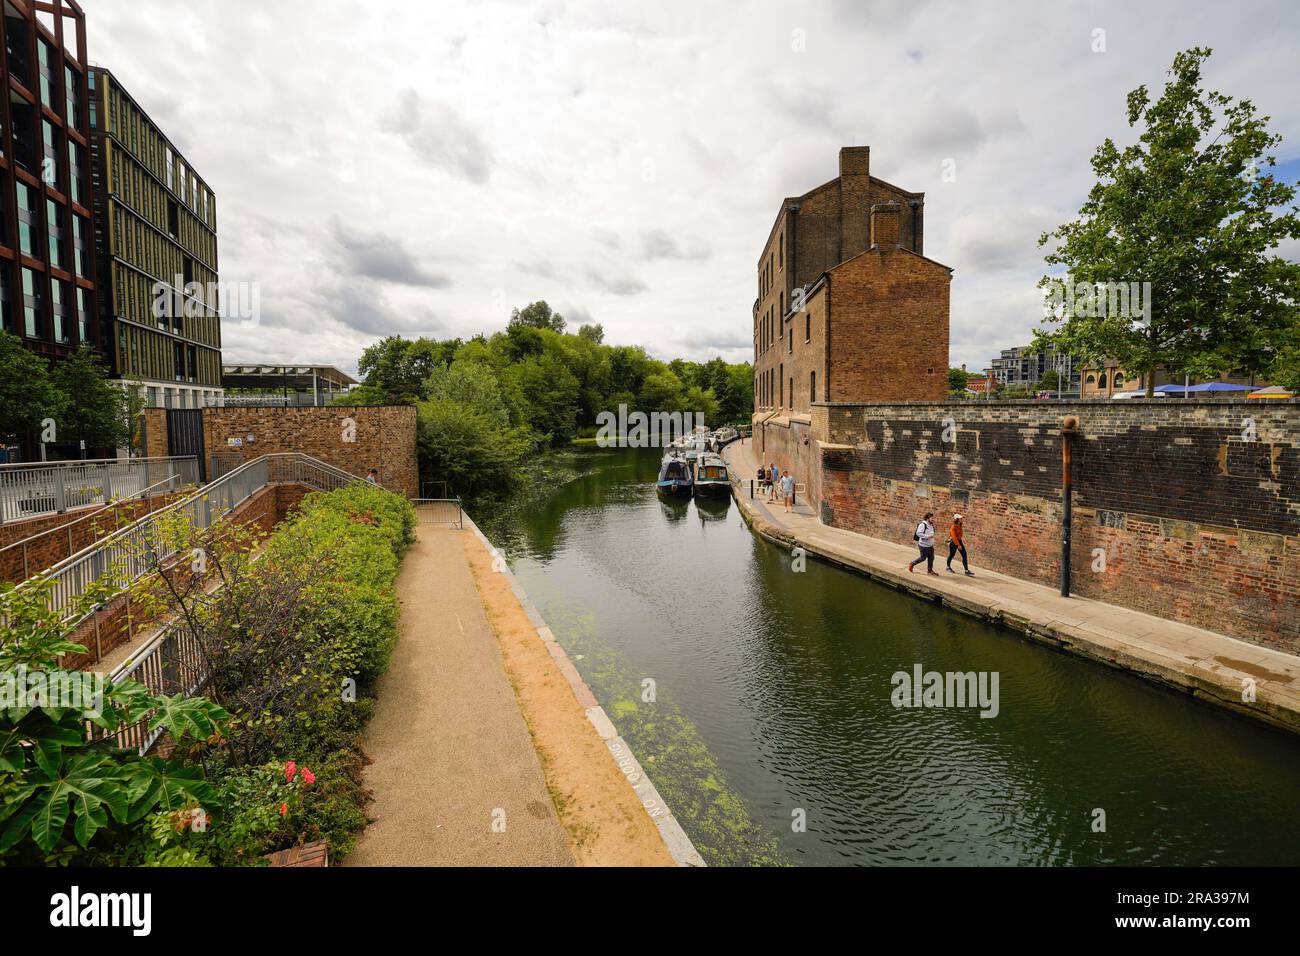 A London canal with canal boats, a narrowboat as seen on Peaky Blinders. Regent's Canal, a scenic waterway that passes by the zoo and Camden Market. Stock Photo